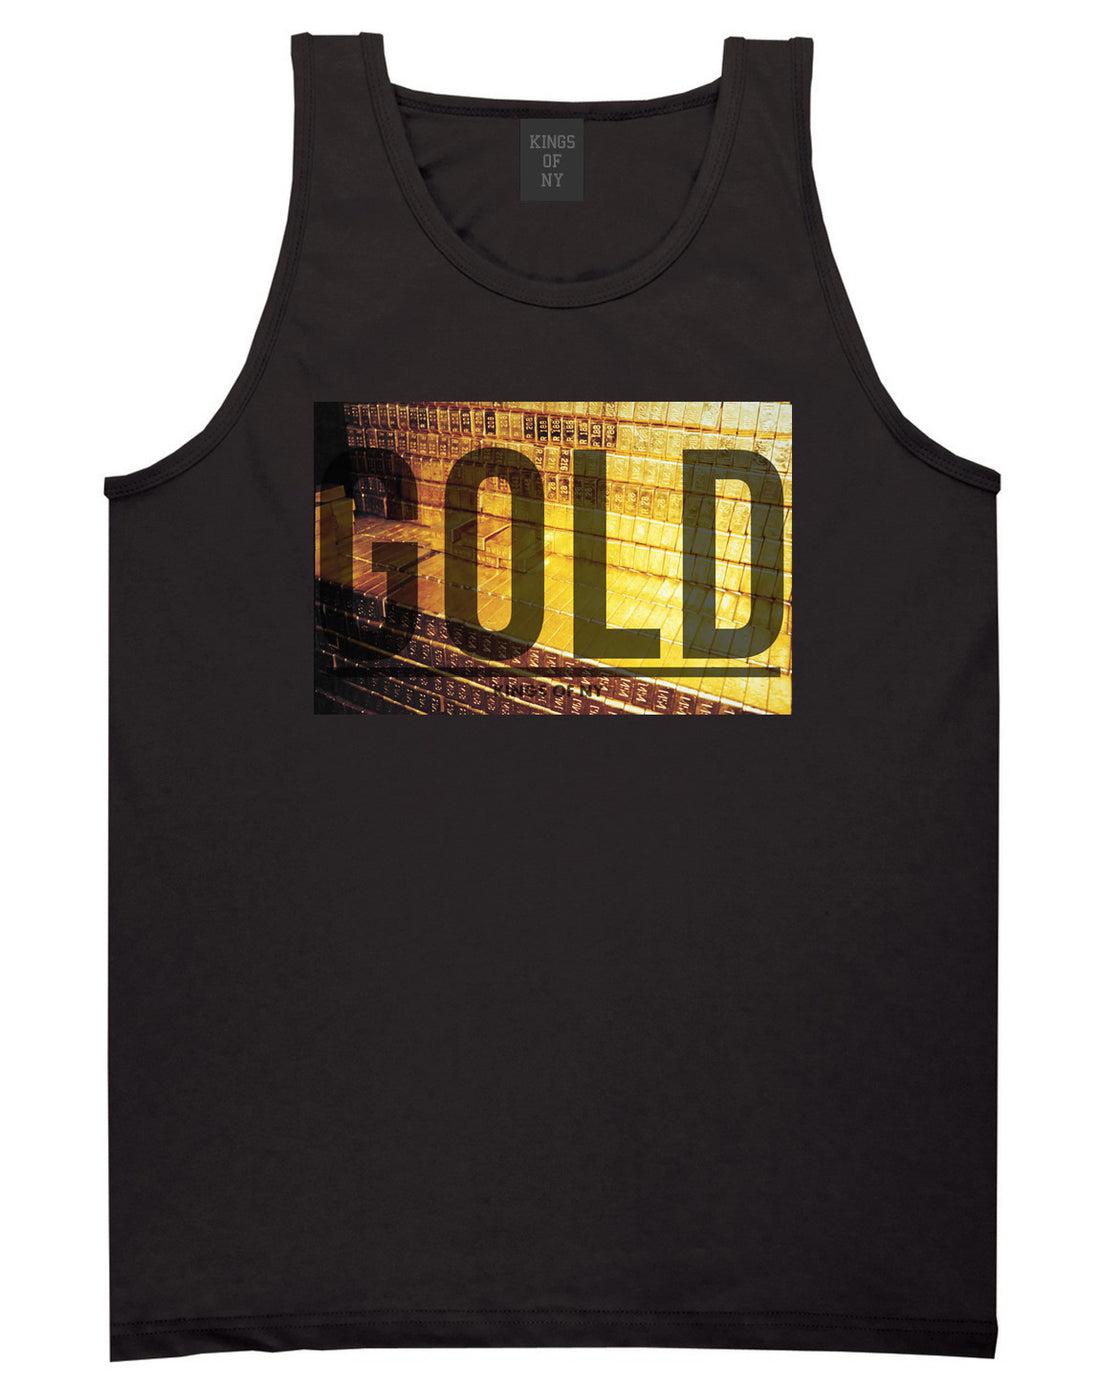 Gold Bricks Money Luxury Bank Cash Tank Top In Black by Kings Of NY